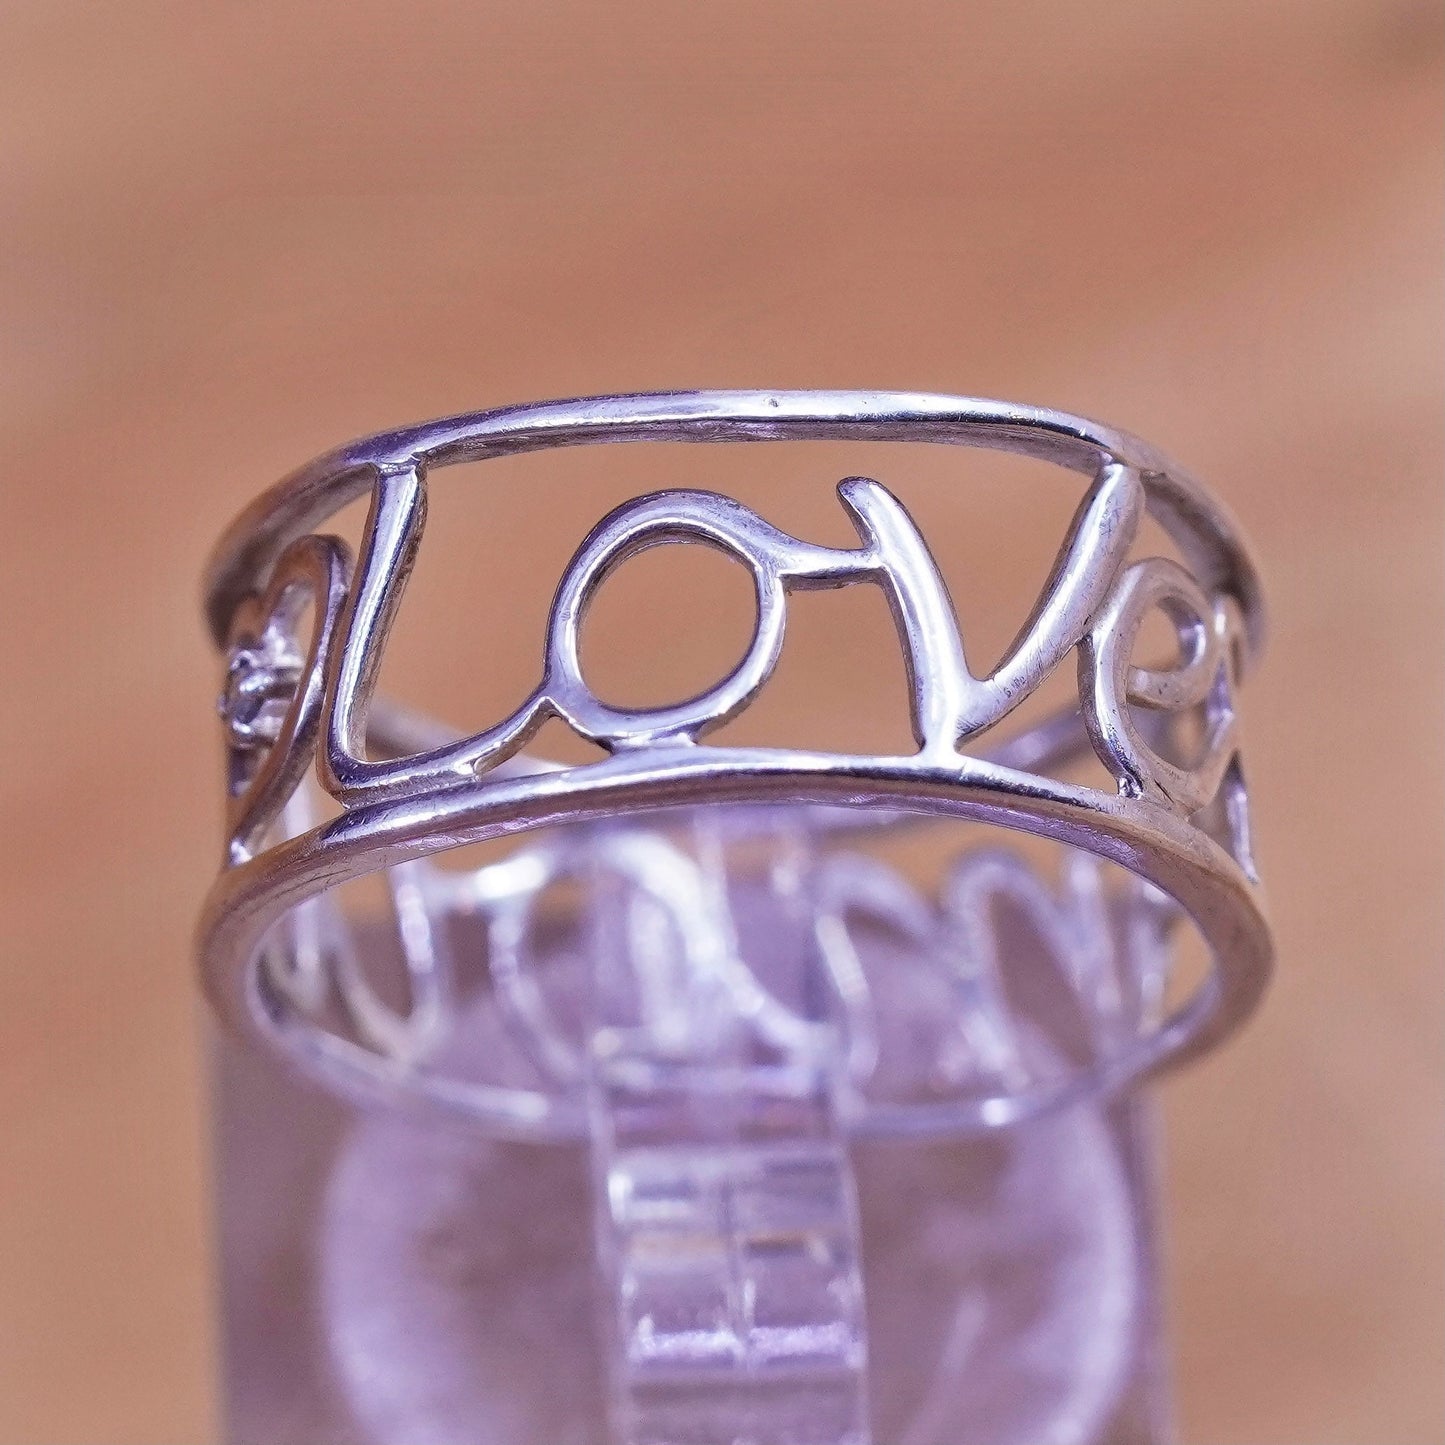 Size 8, vintage Sterling silver ring, 925 word letter “love” band